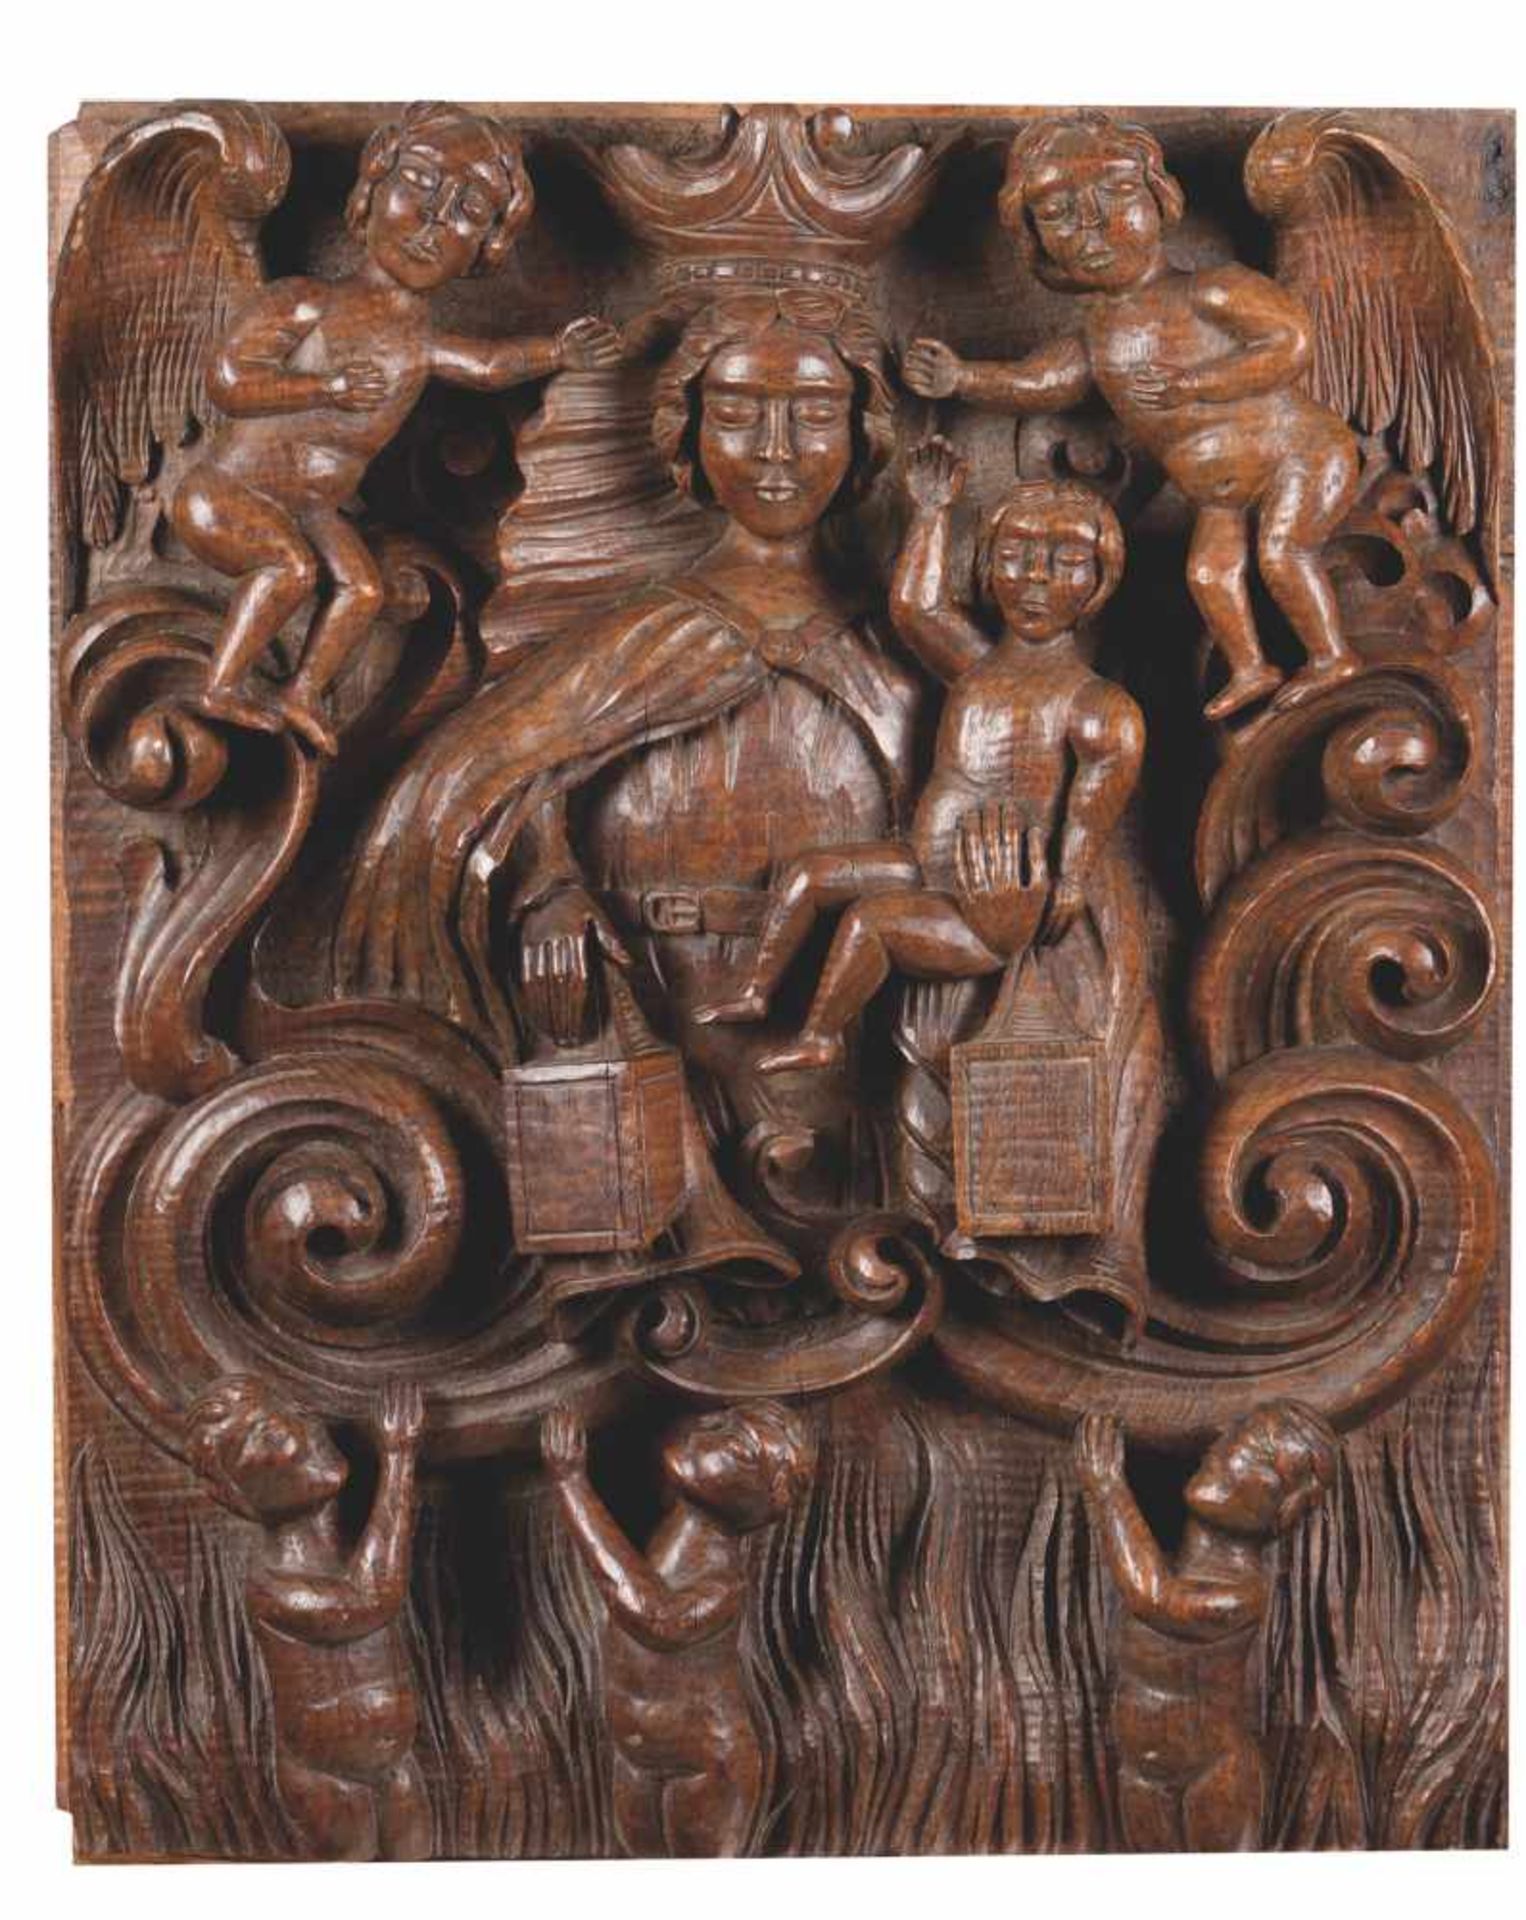 Our Lady The Mother of SoulsA fragment of a carved wooden retableDepicting The Virgin and Child,